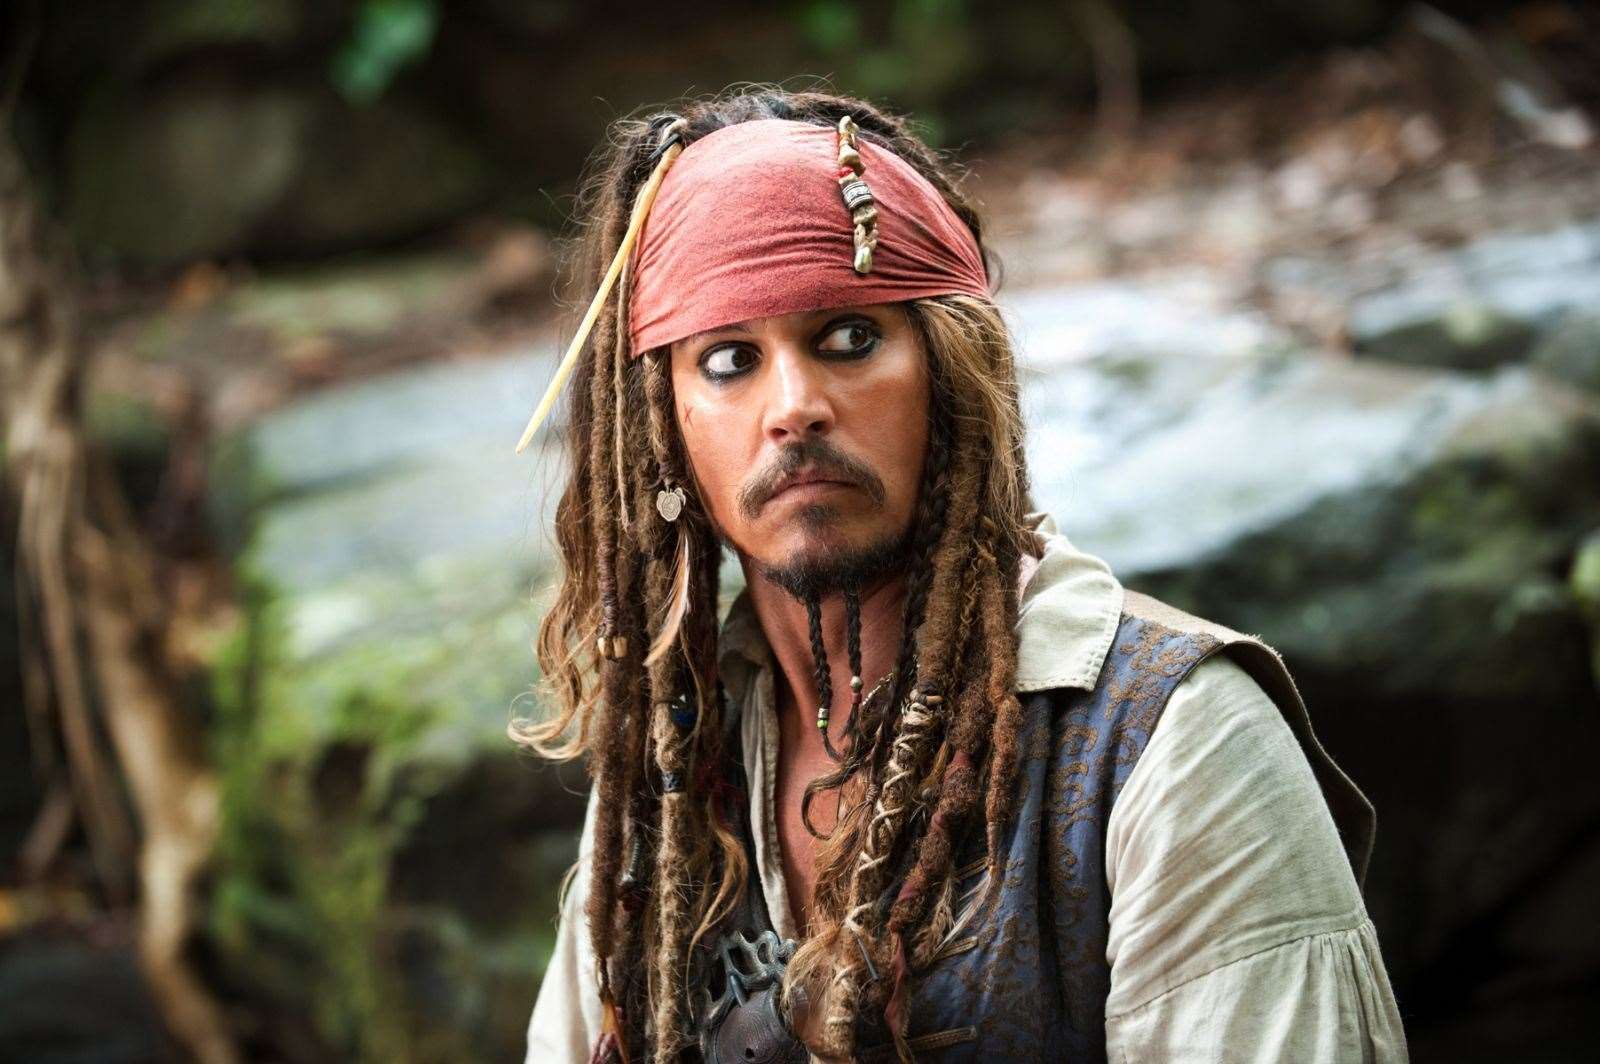 Captain Jack Sparrow, played by Johnny Depp, is one of Hollywood's best-loved characters. Picture: Disney